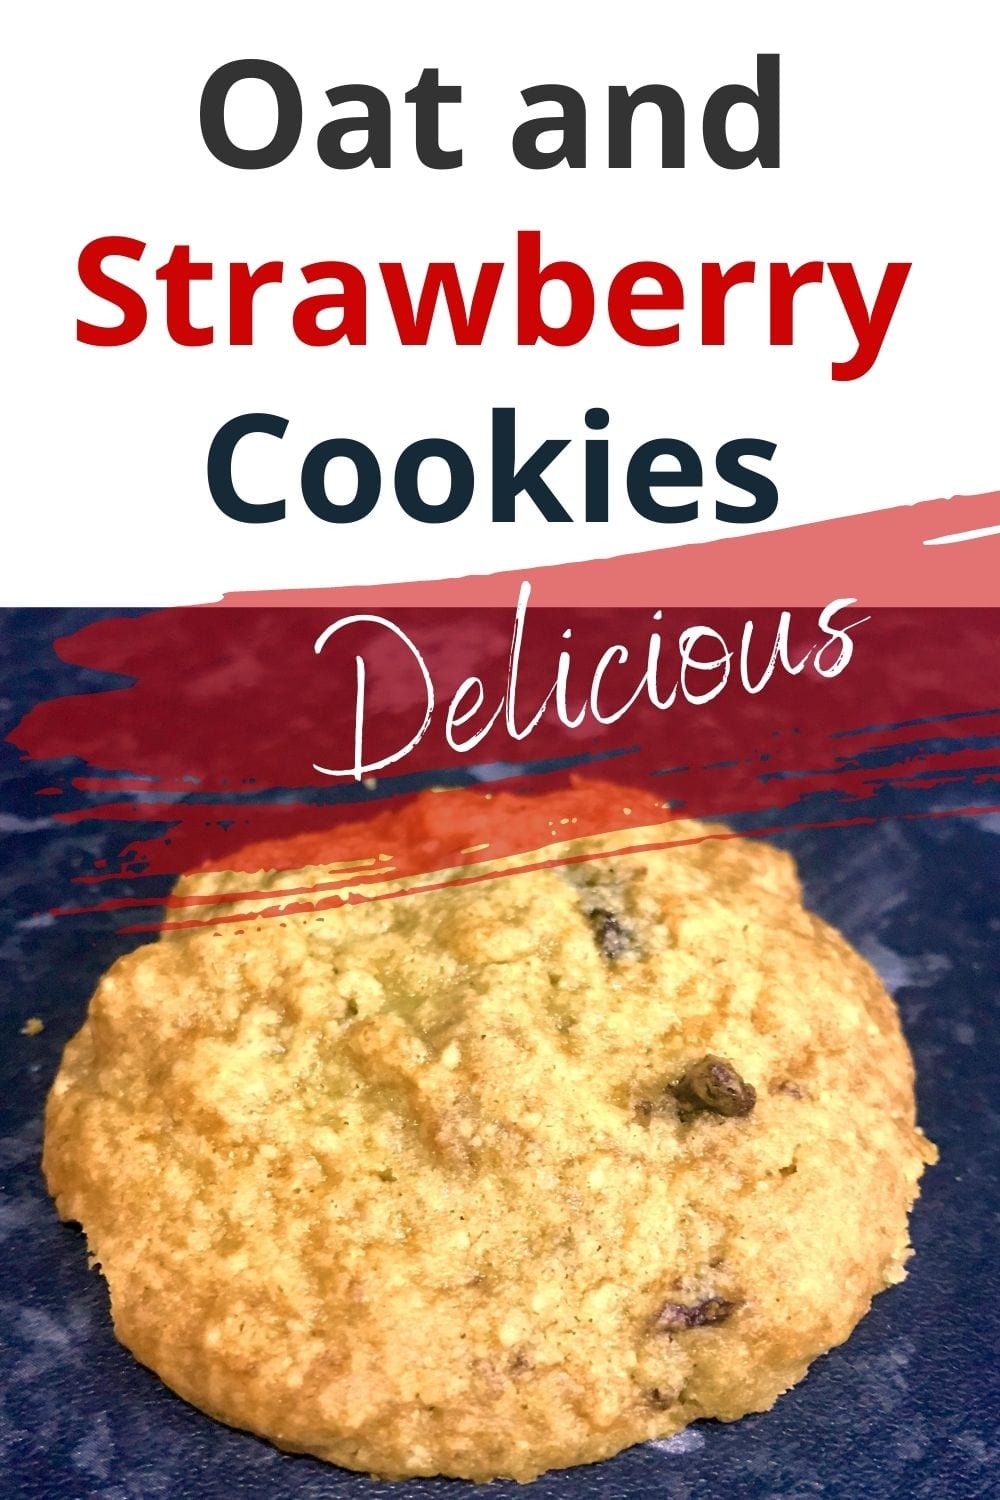 oat and Strawberry cookies